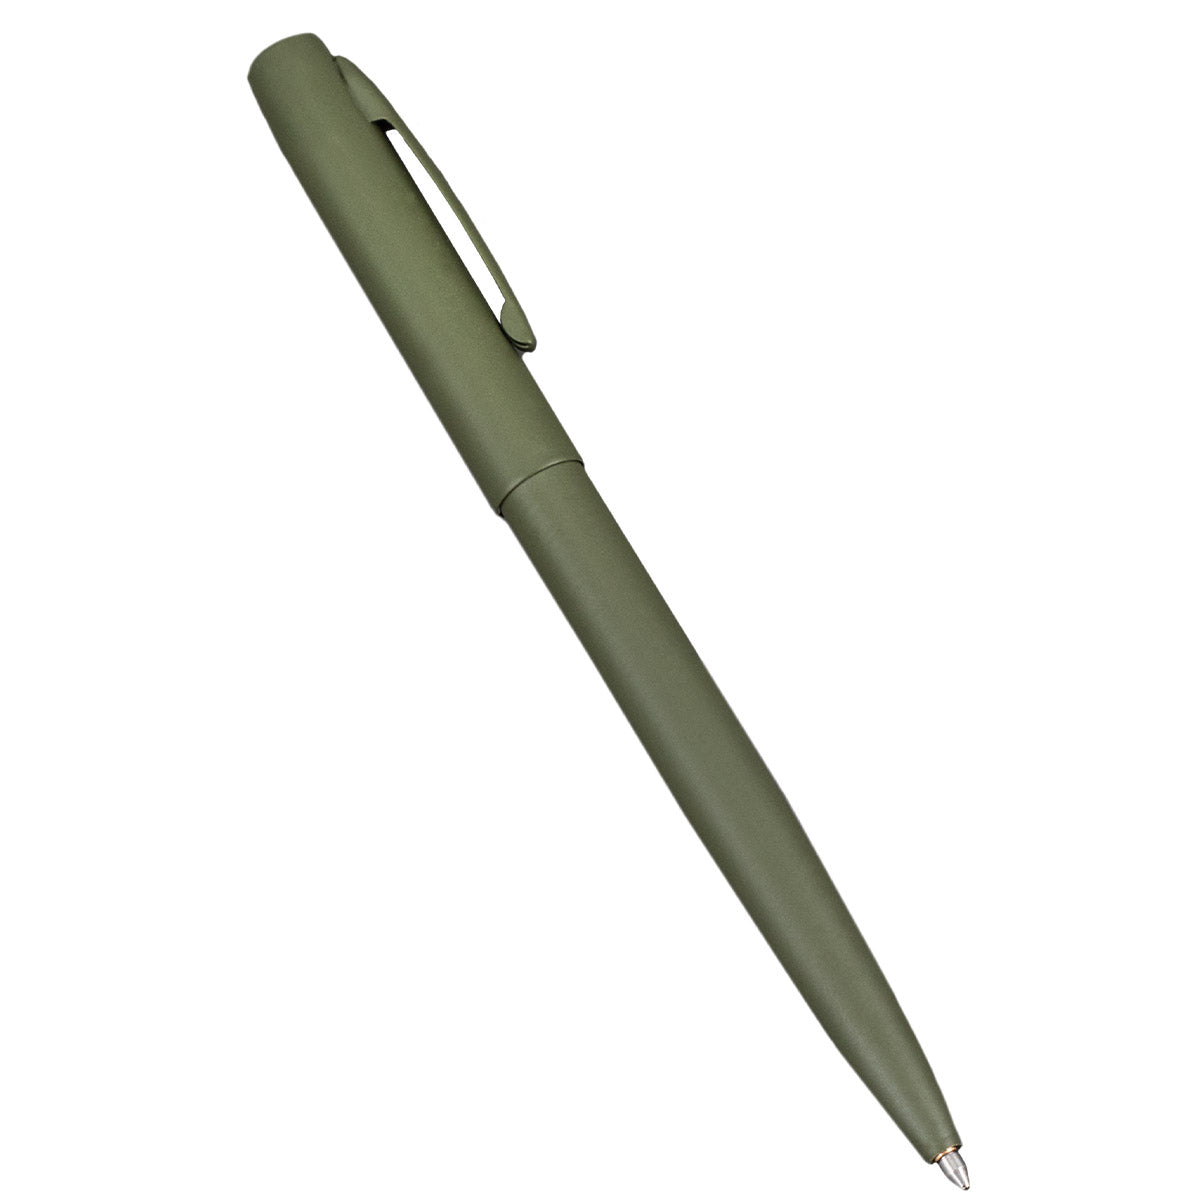 Rite in the Rain All Weather Metal Clicker Pen Olive Drab Green Black Ink Pens, Notebooks and Stationery Rite in the Rain Olive Drab Tactical Gear Supplier Tactical Distributors Australia